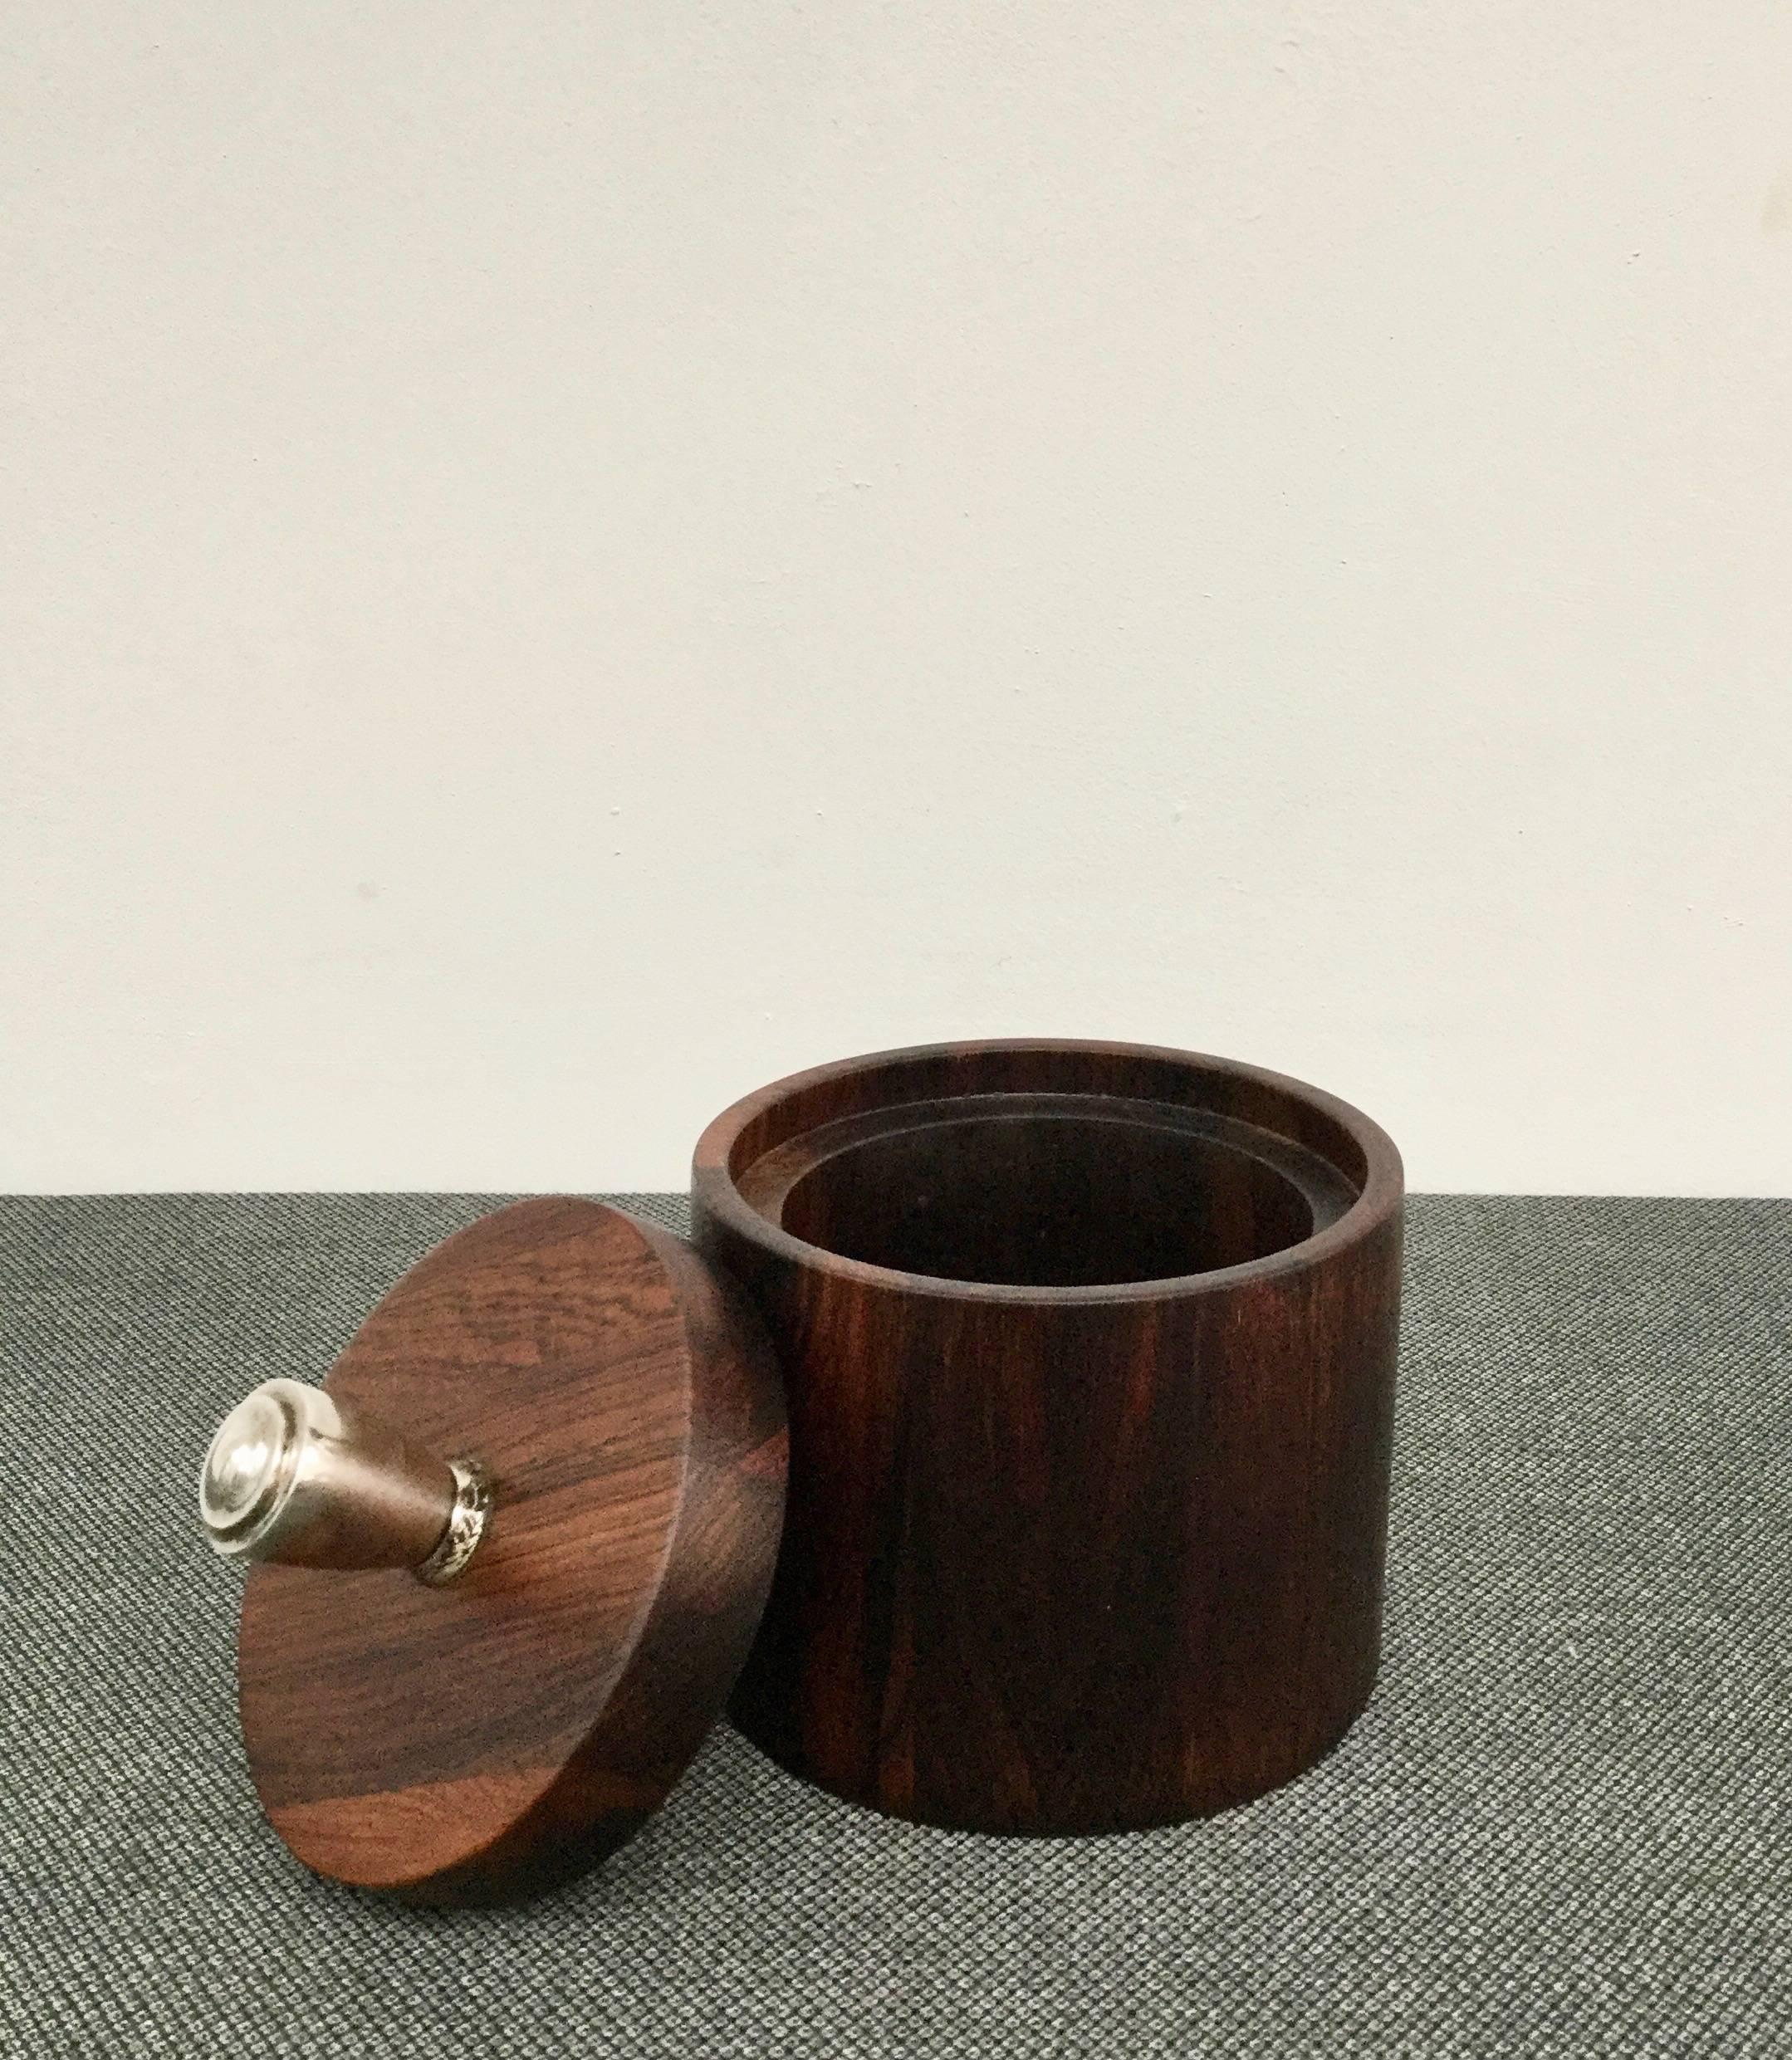 Collectable solid jacaranda wooden pot with a sterling (925 marked) handgrip by Jean Gillon. Made 1960 by Italma Wood Art, Brazil.

Originally designed as a tobacco pot but now serves as a high quality decorative interior object.


